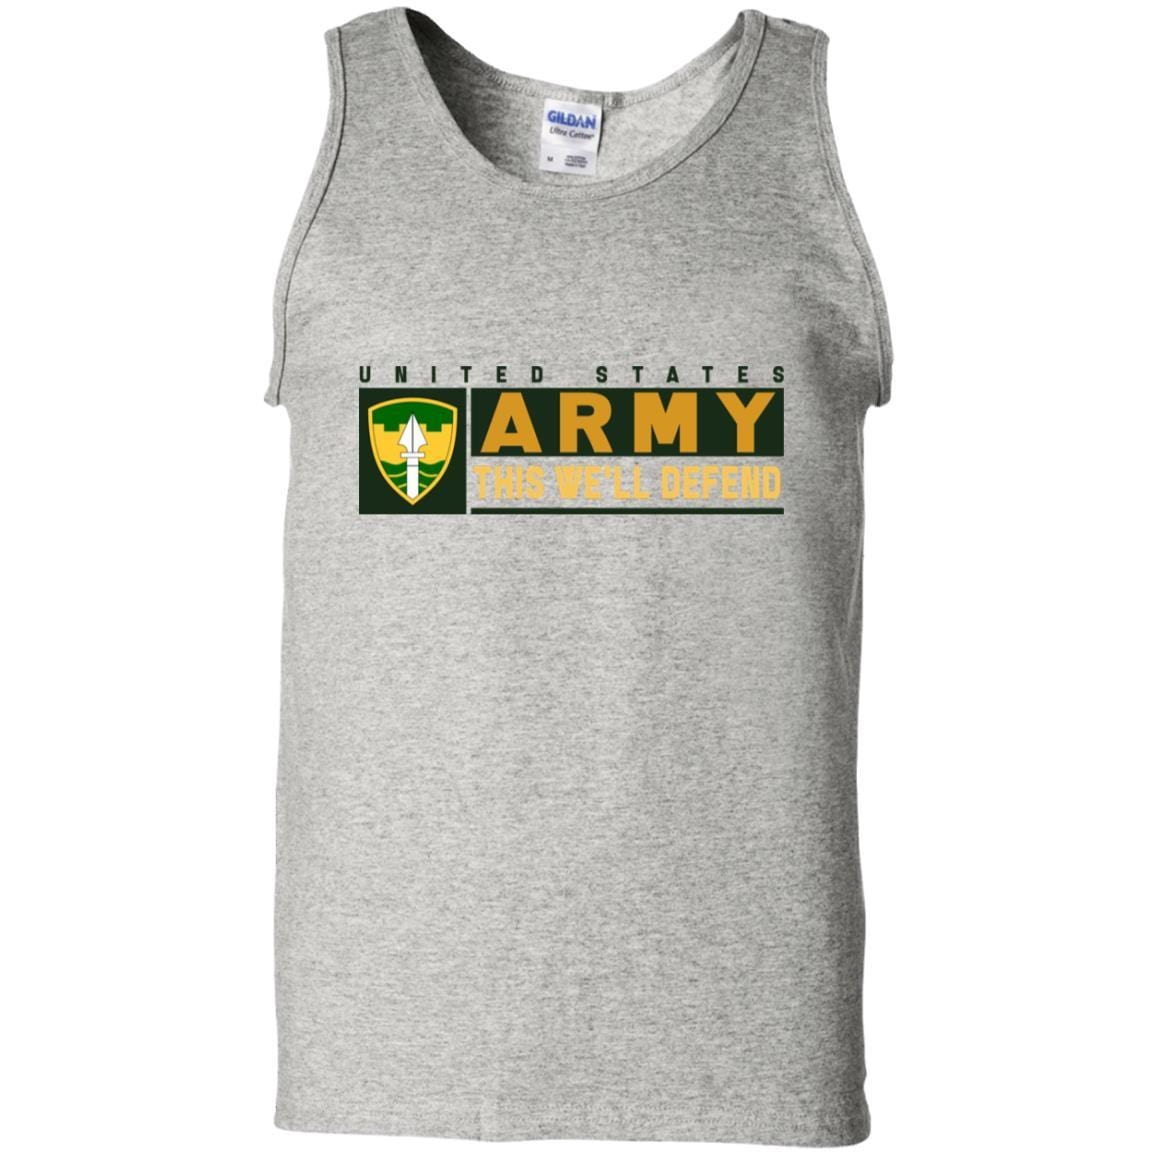 US Army 43 MILITARY POLICE BRIGADE- This We'll Defend T-Shirt On Front For Men-TShirt-Army-Veterans Nation